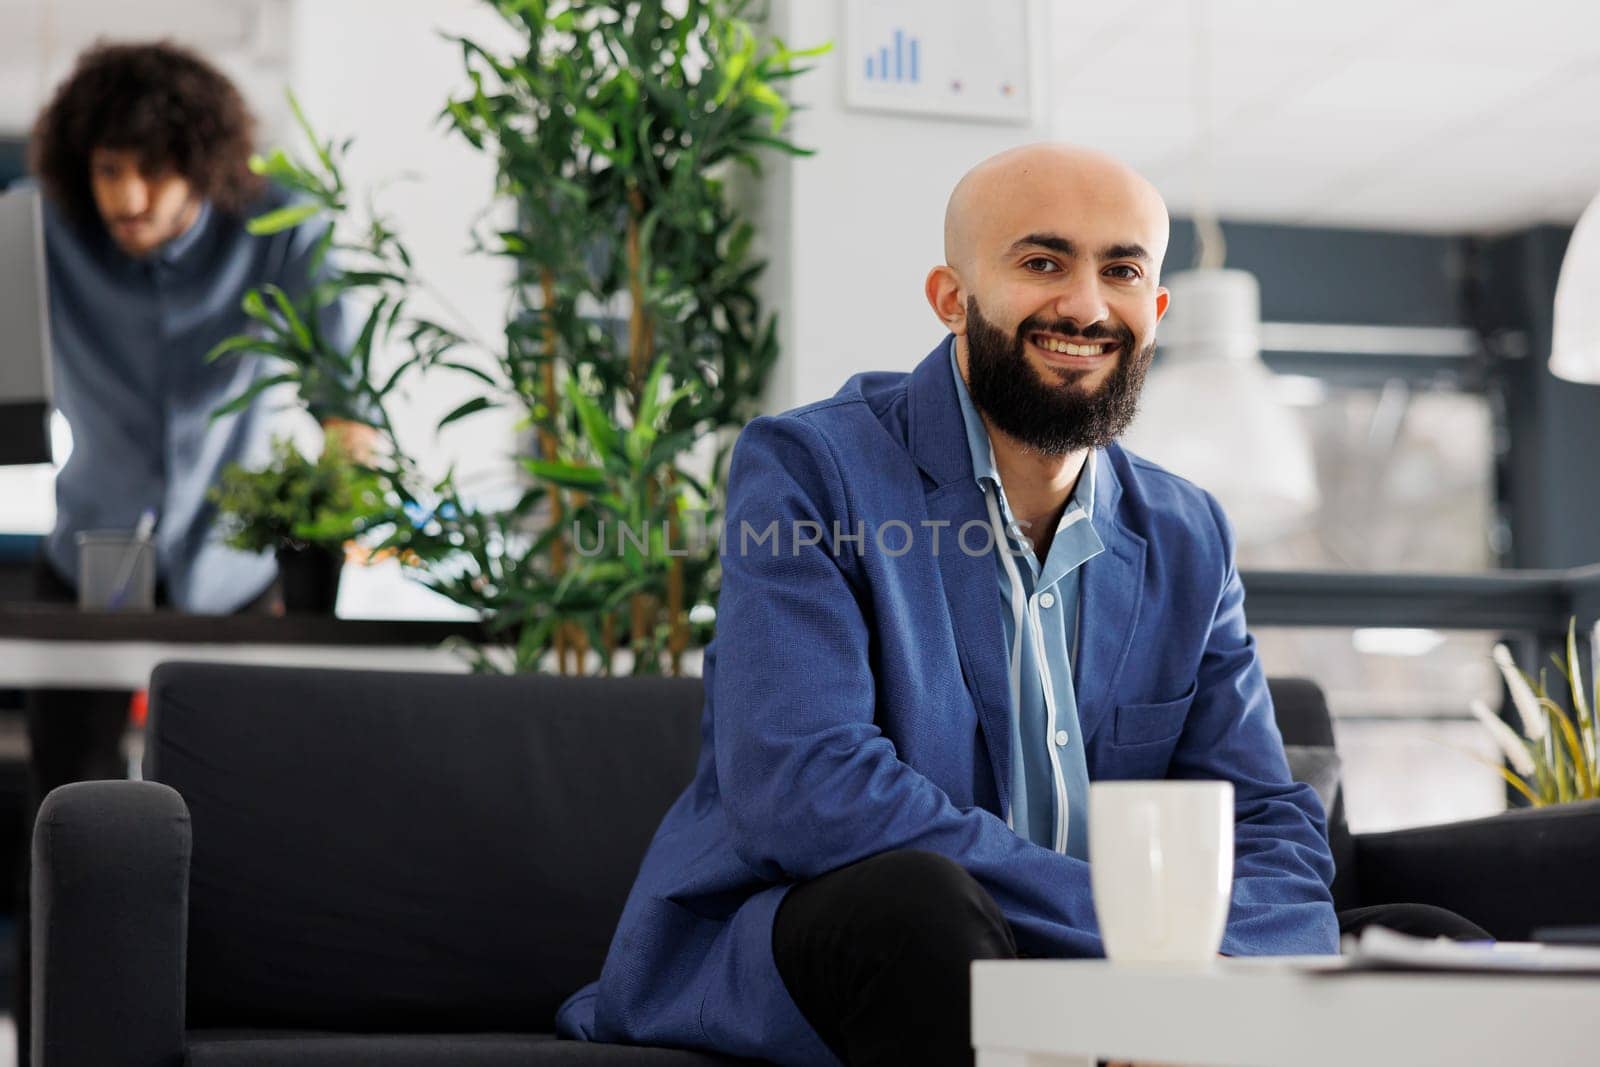 Smiling arab business entrepreneur looking at camera while sitting on couch in office. Start up company successful executive manager wearing suit portrait in coworking space